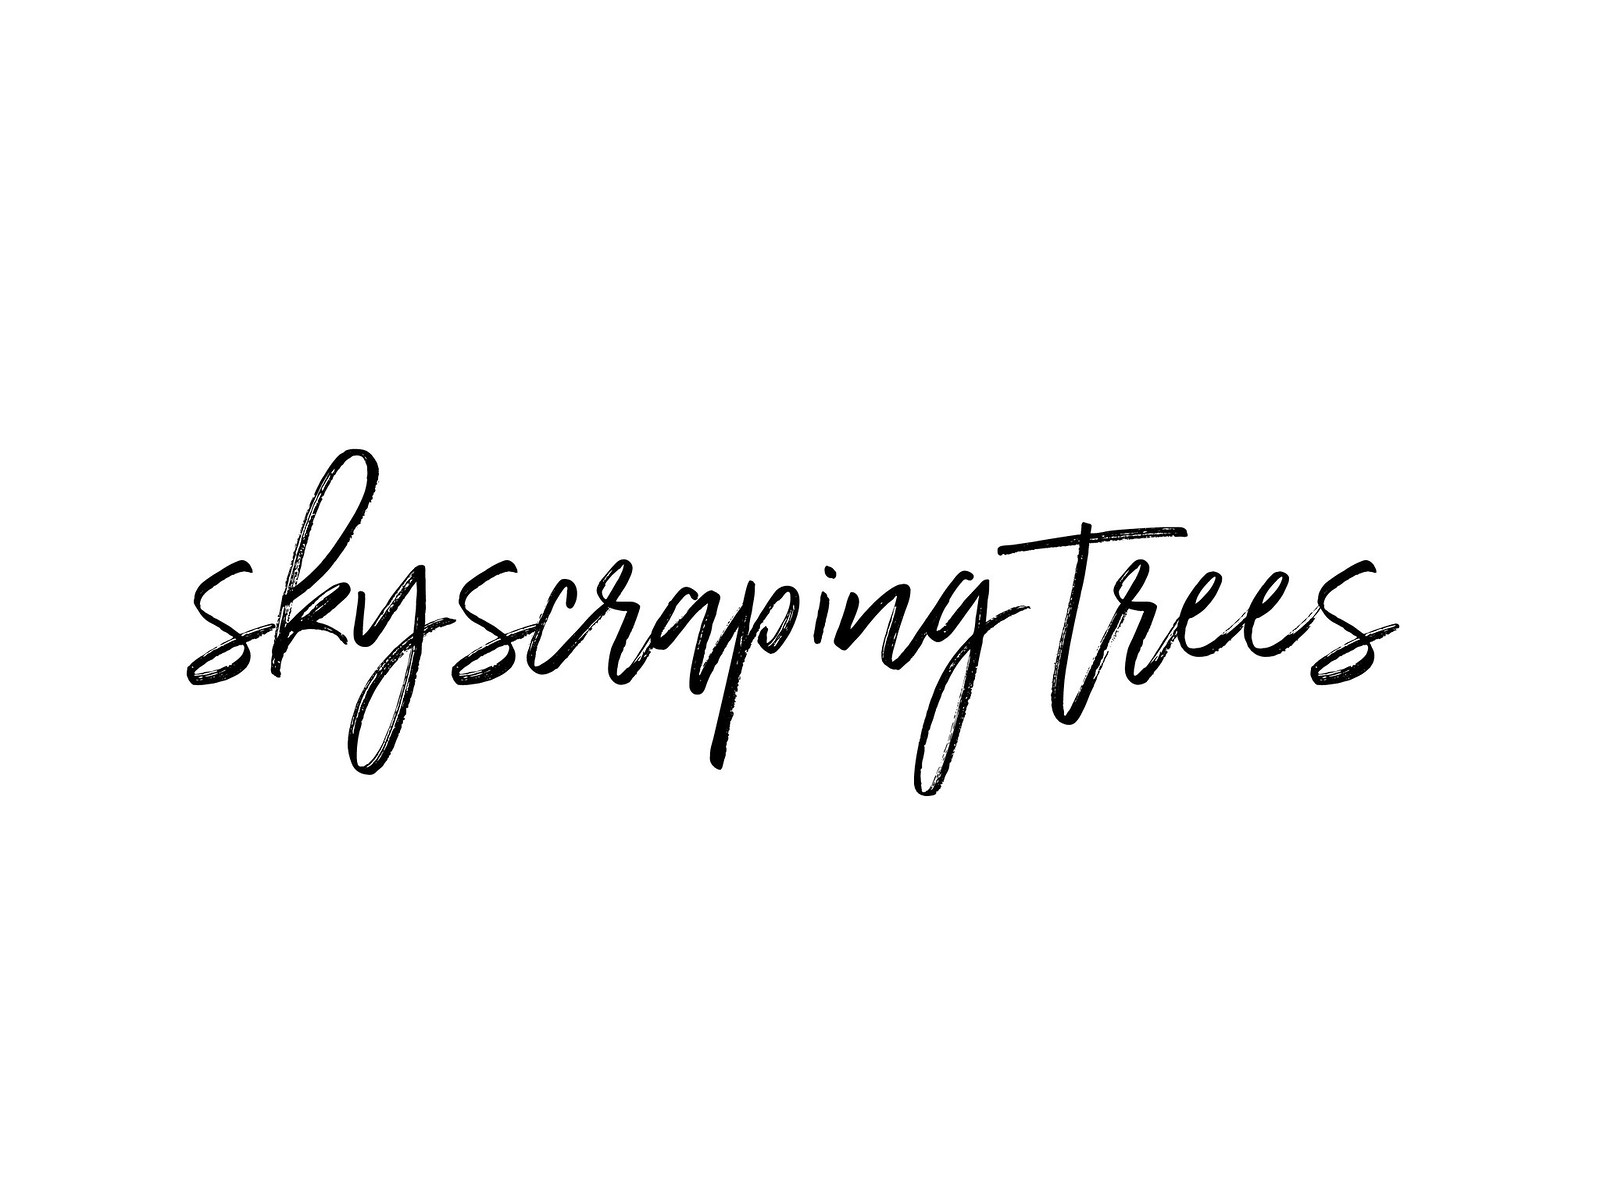 skyscraping trees